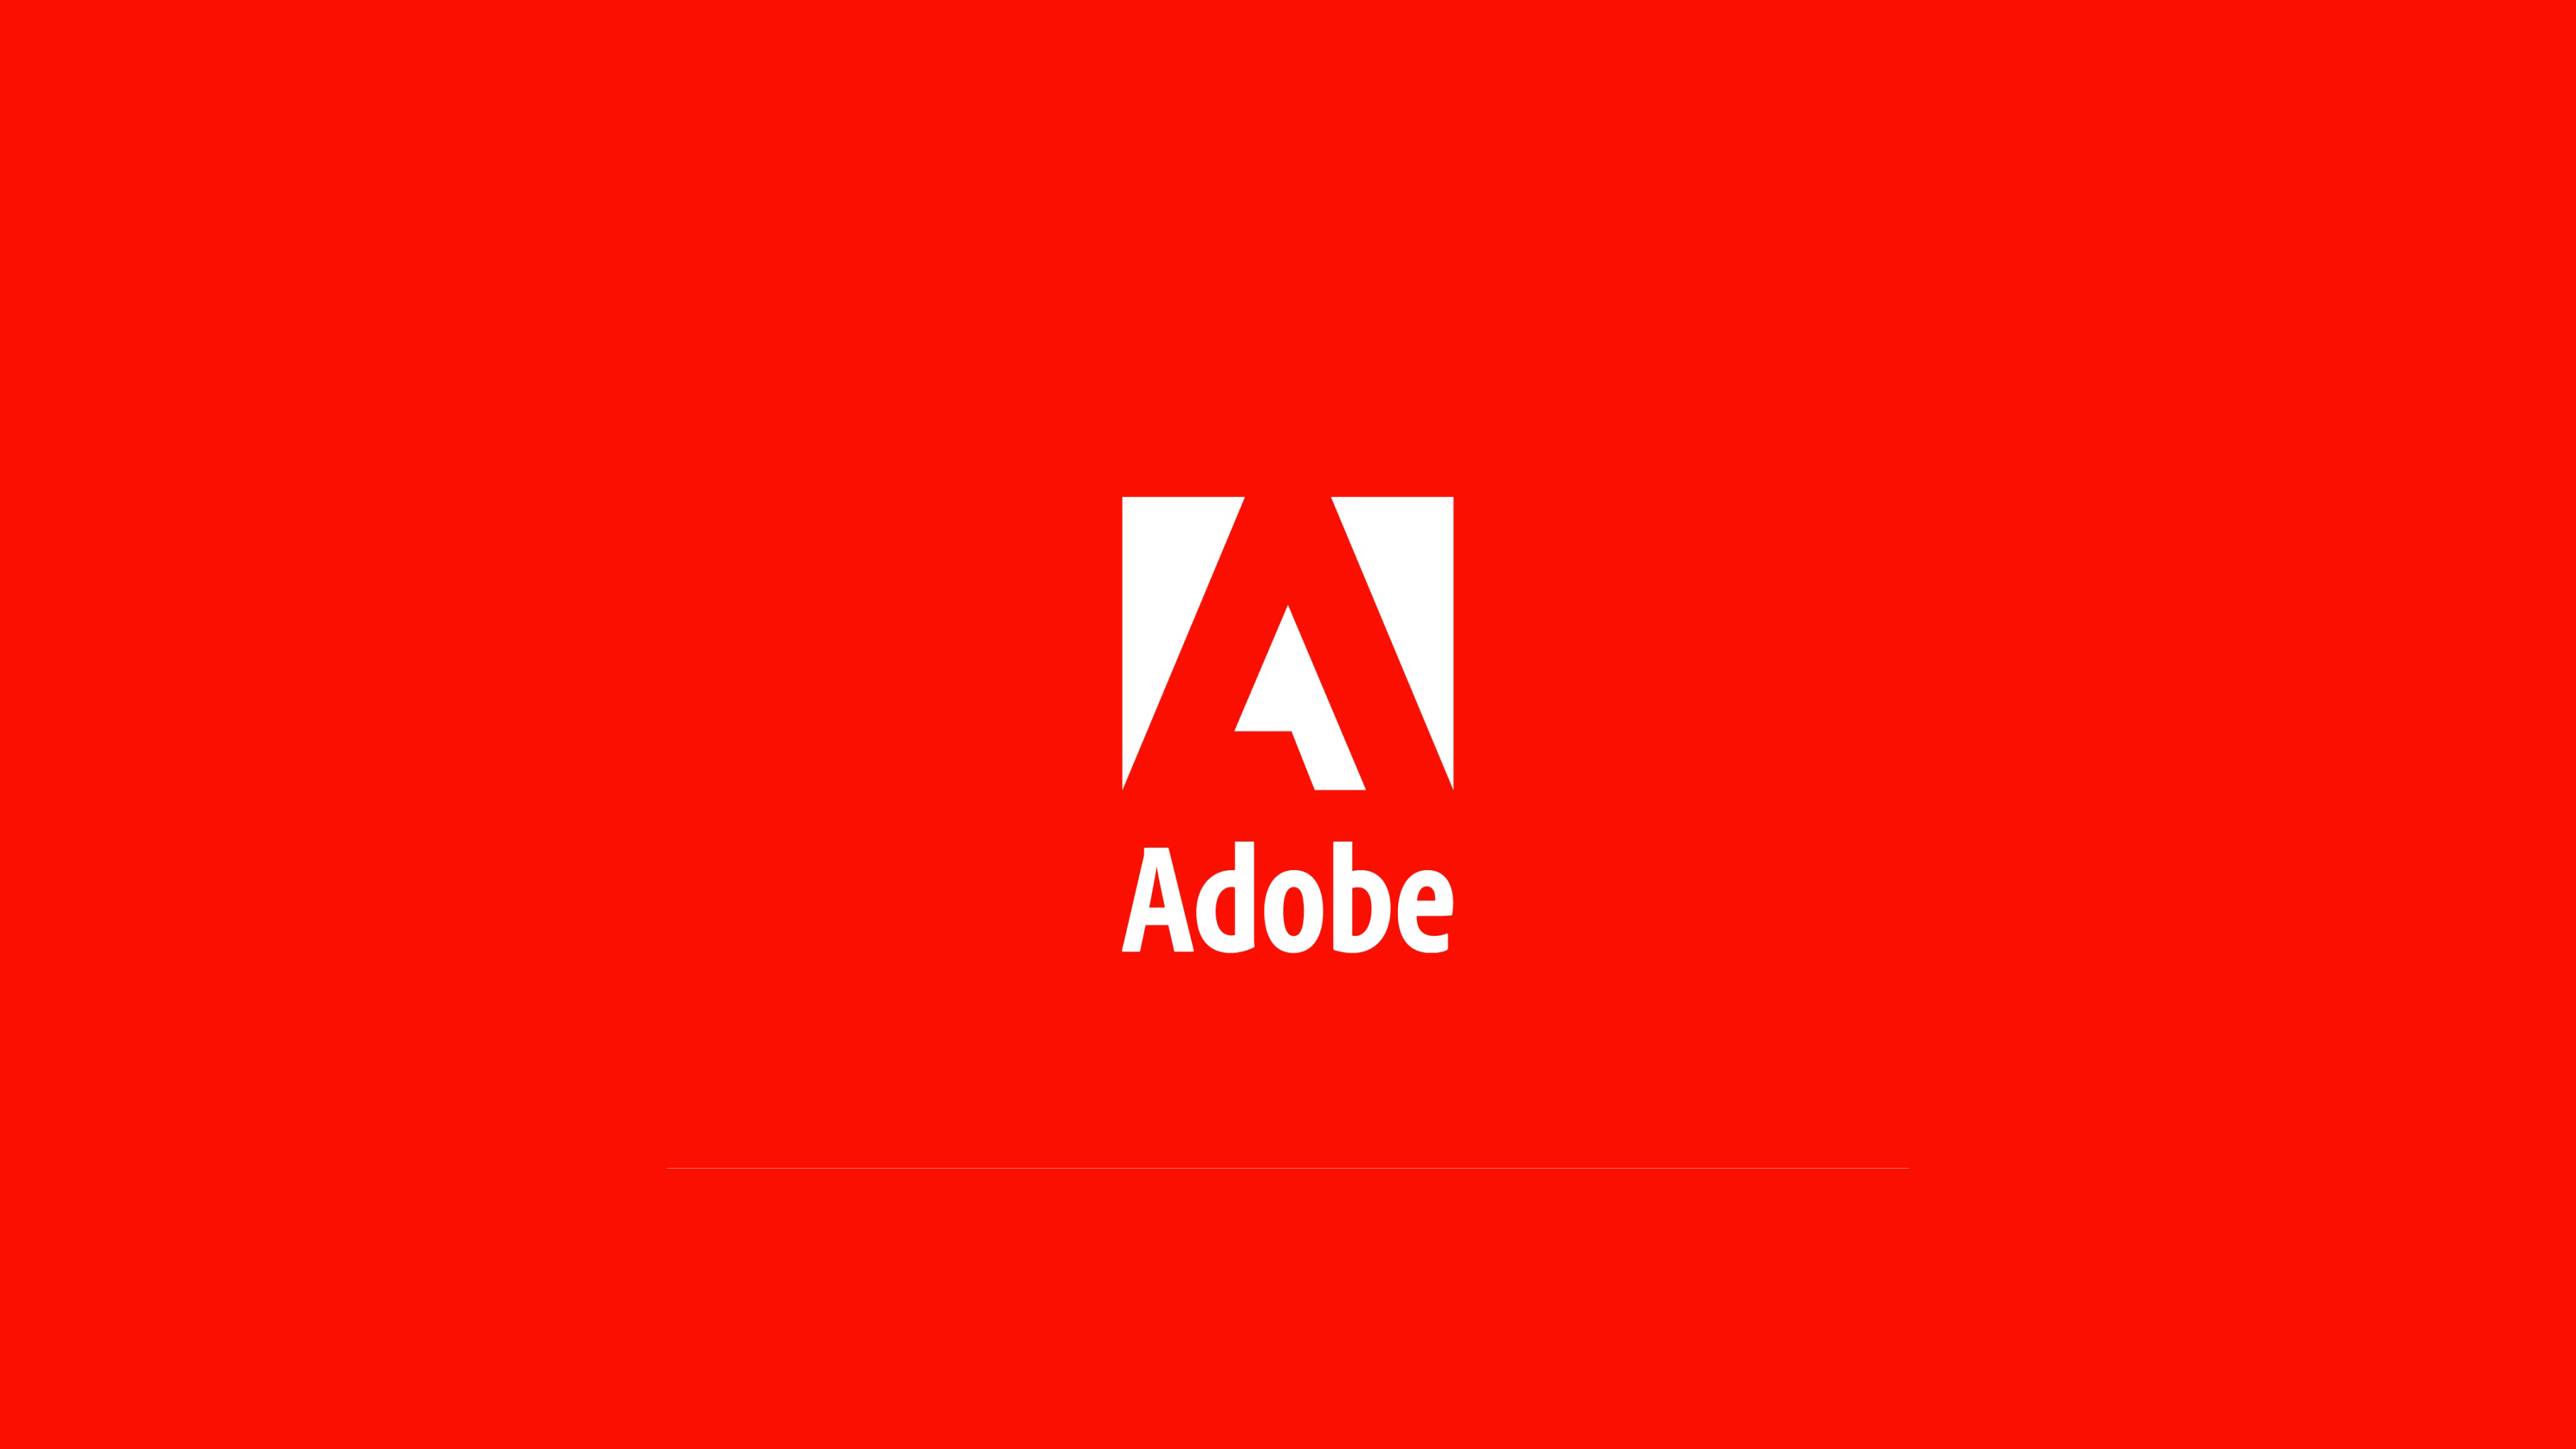 How does Adobe Benefit From the Free User Feedback at DearAdobe.com?